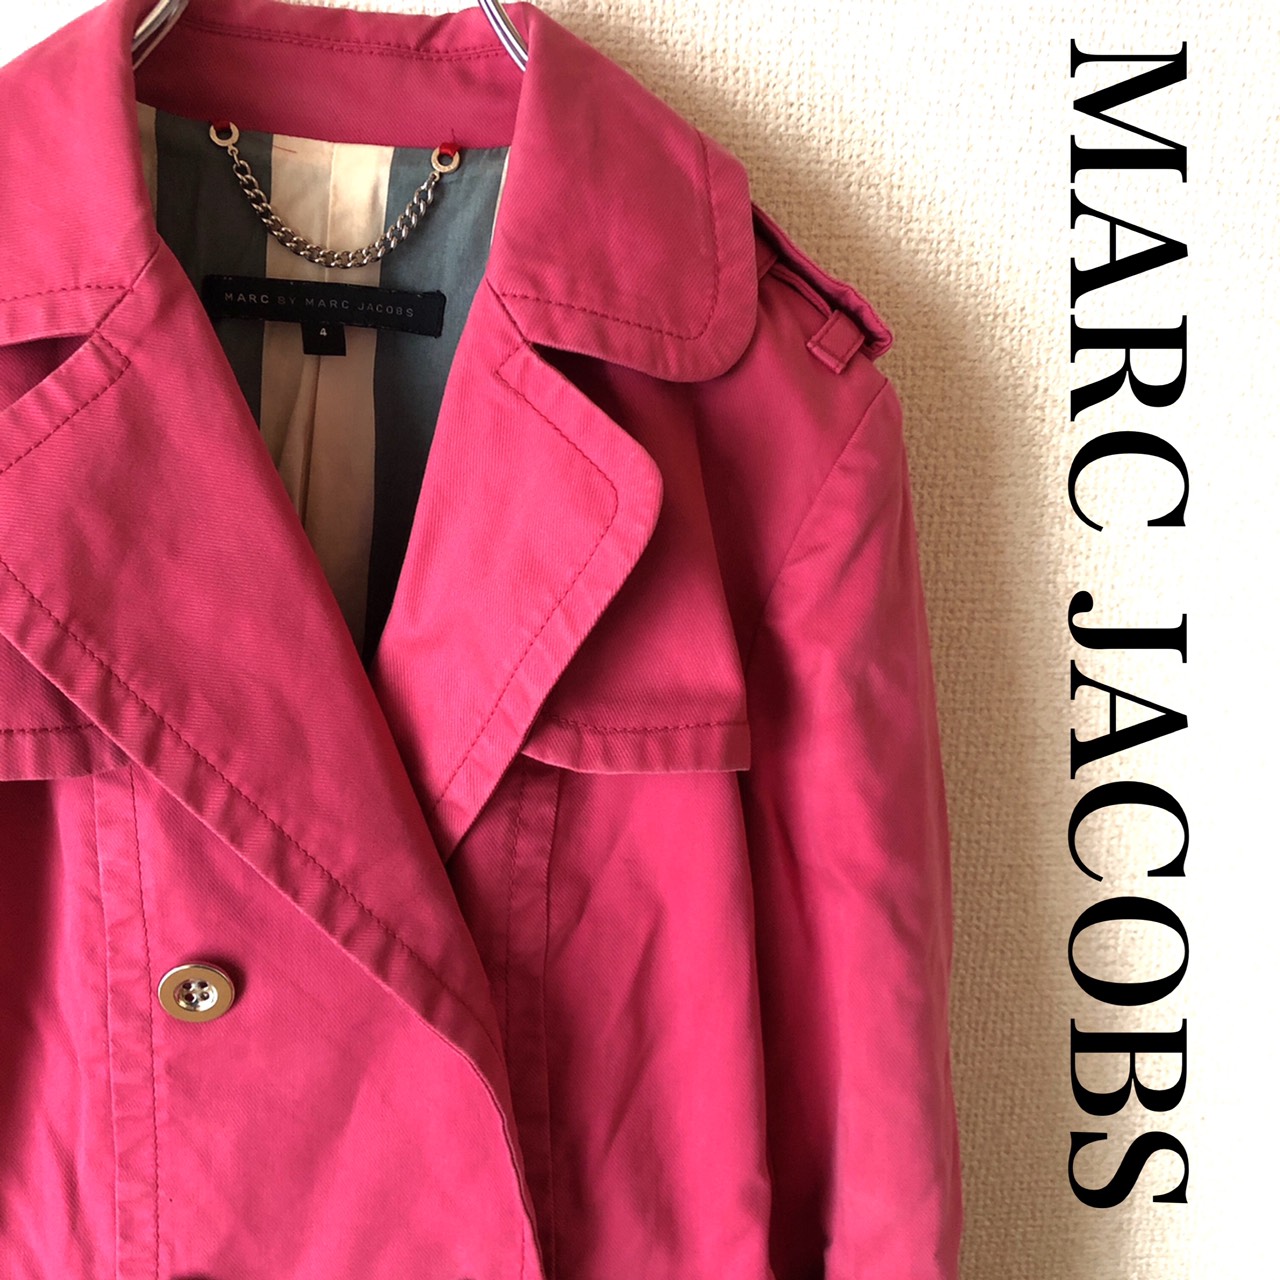 MARC BY MARC JACOBS トレンチコート | 黄色い古着屋